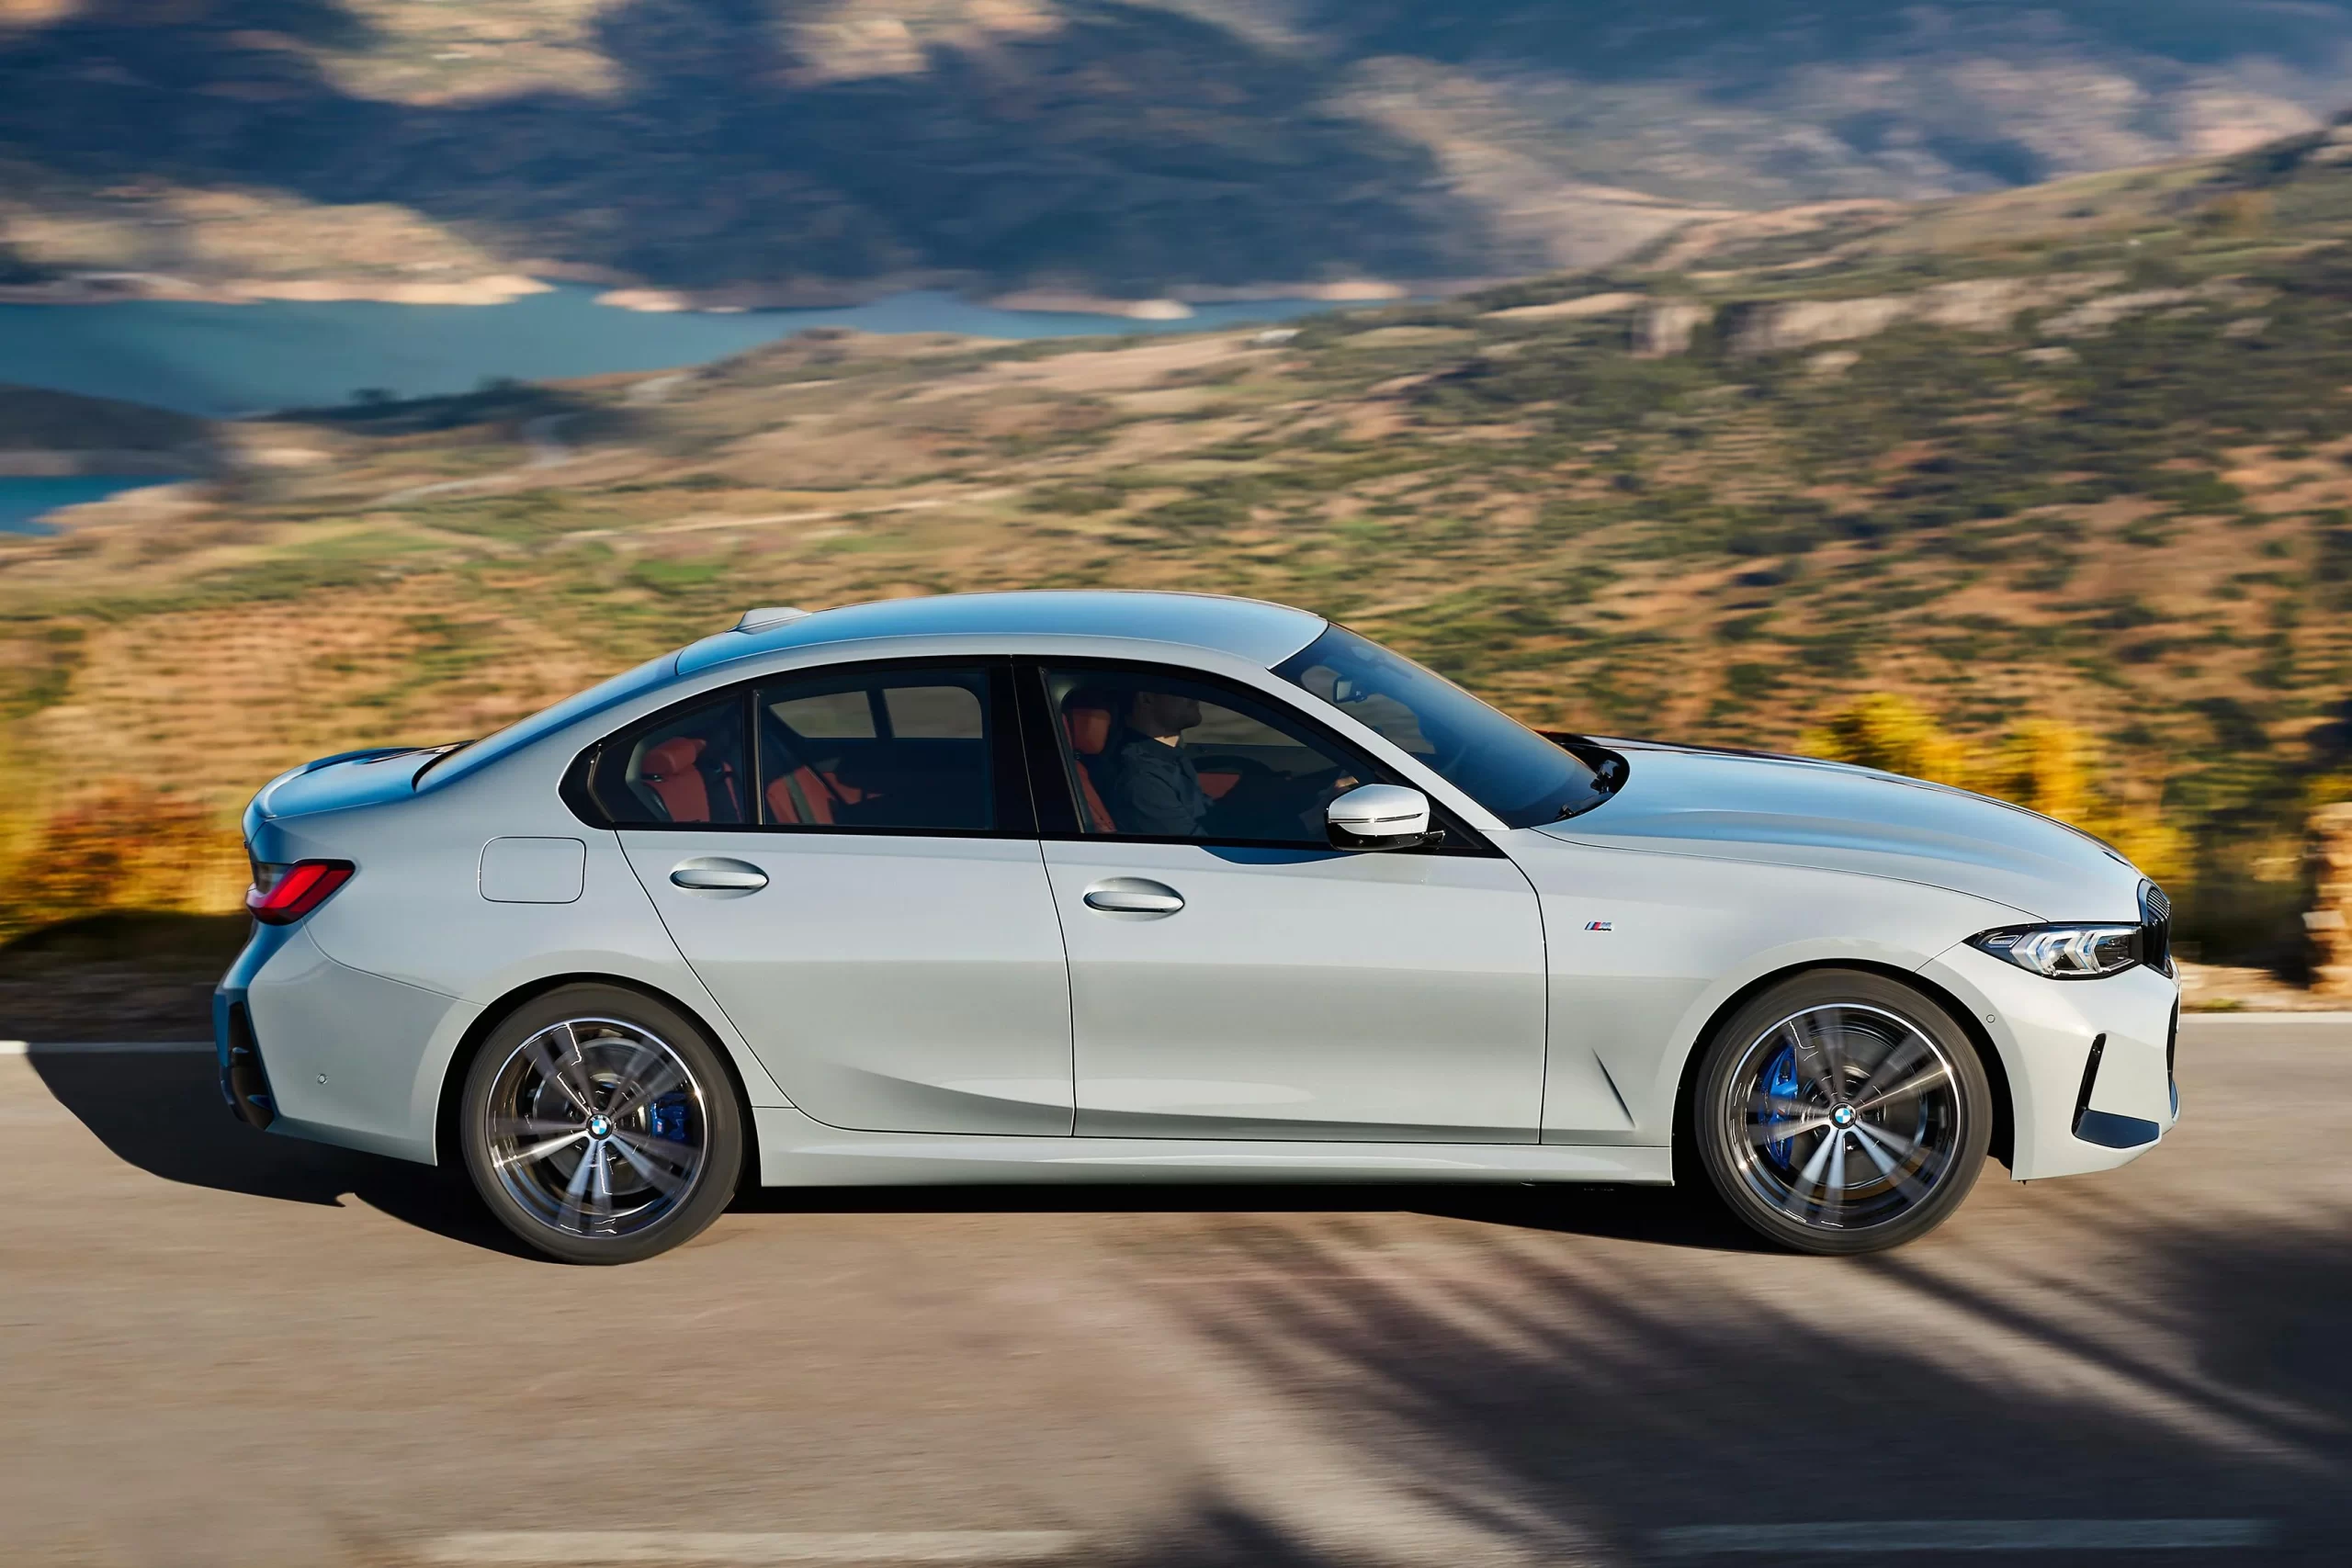 BMW 3 Series Price in the United States